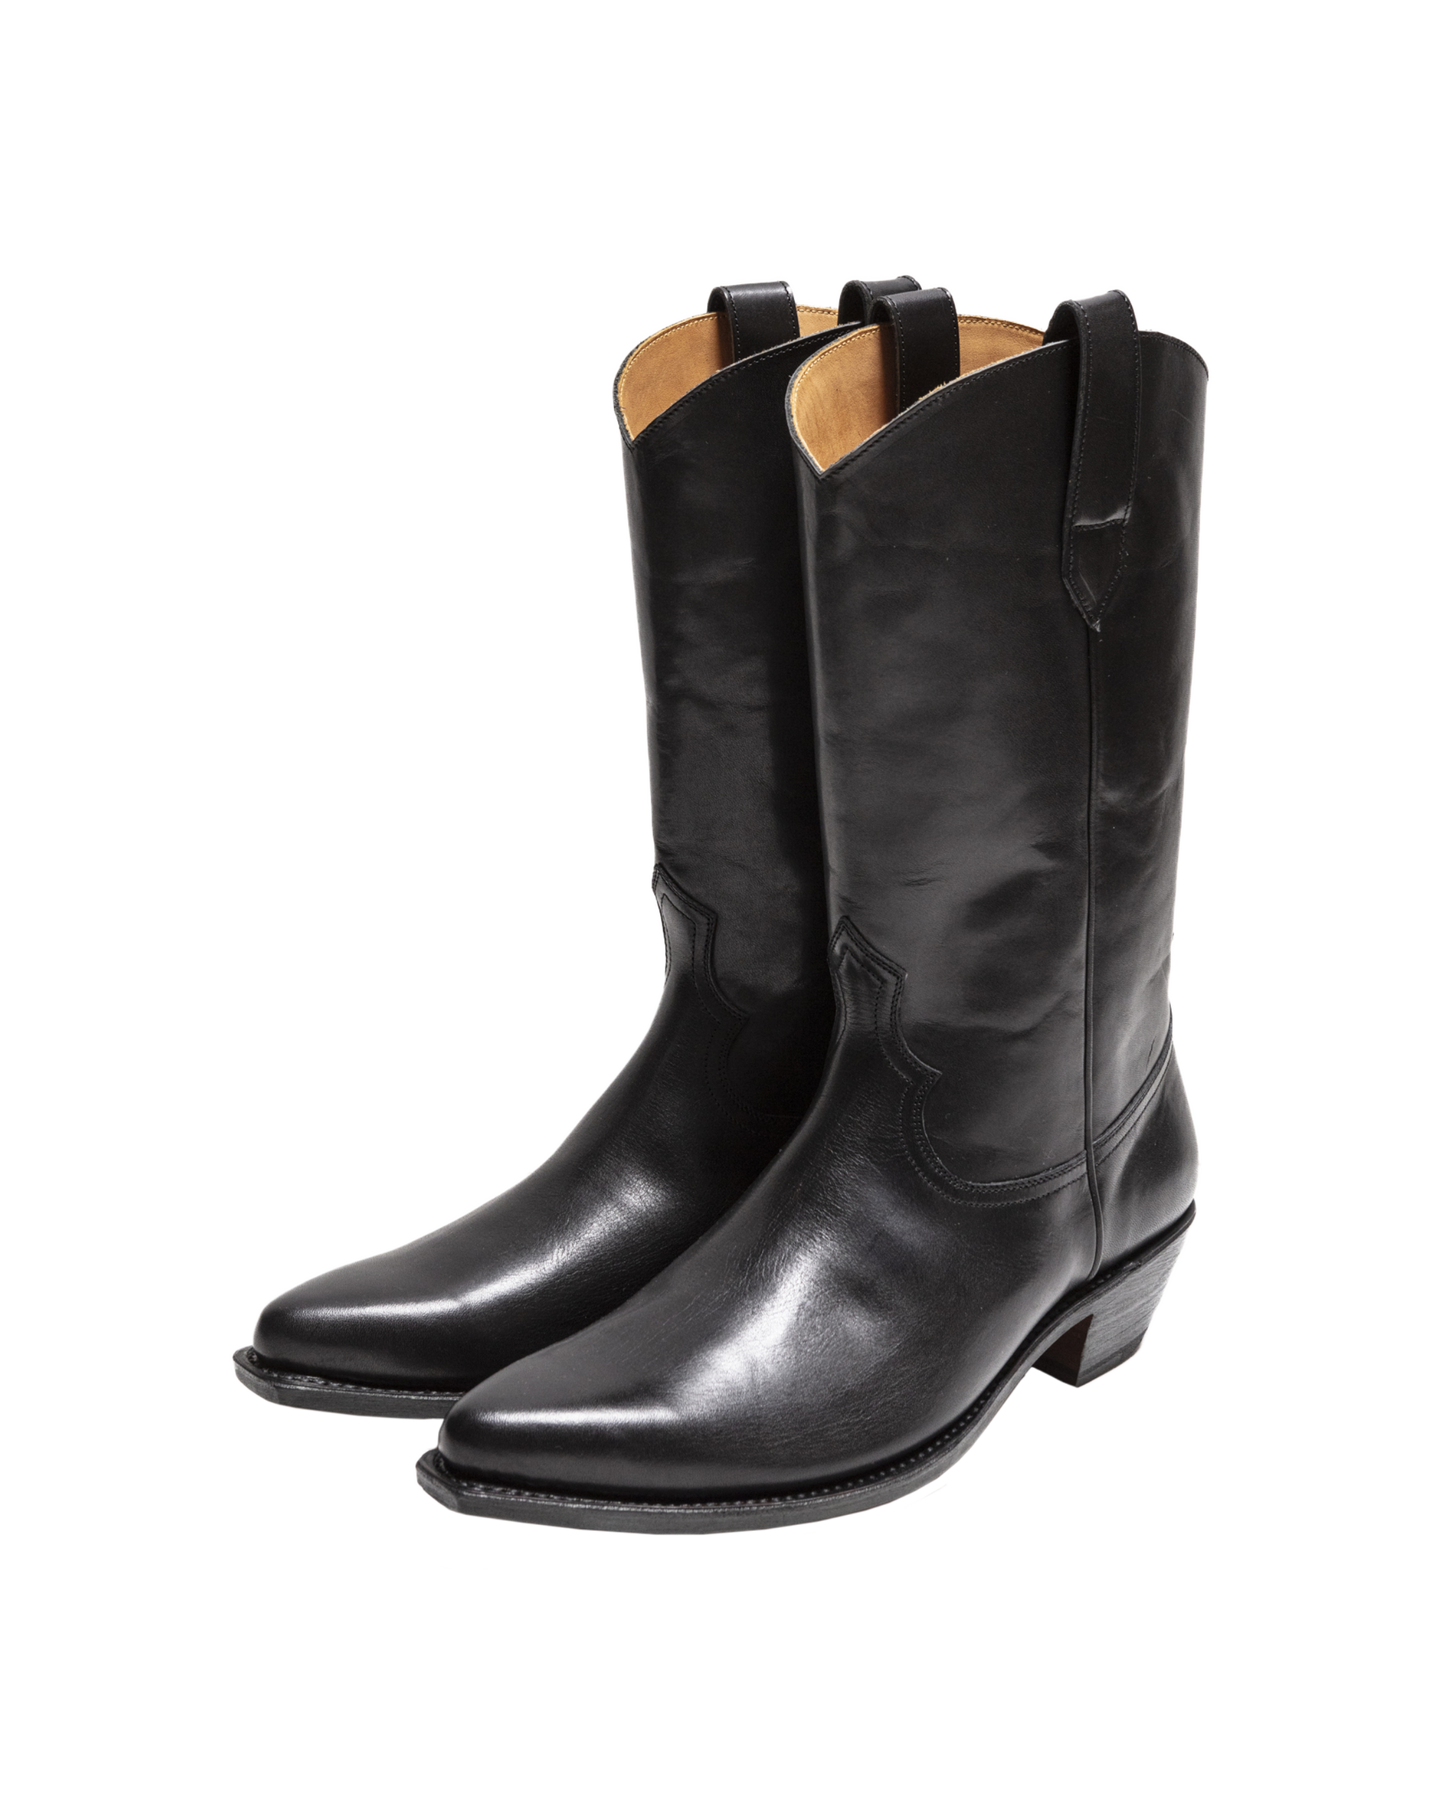 WESTERN LONG BOOTS -COWHIDE-